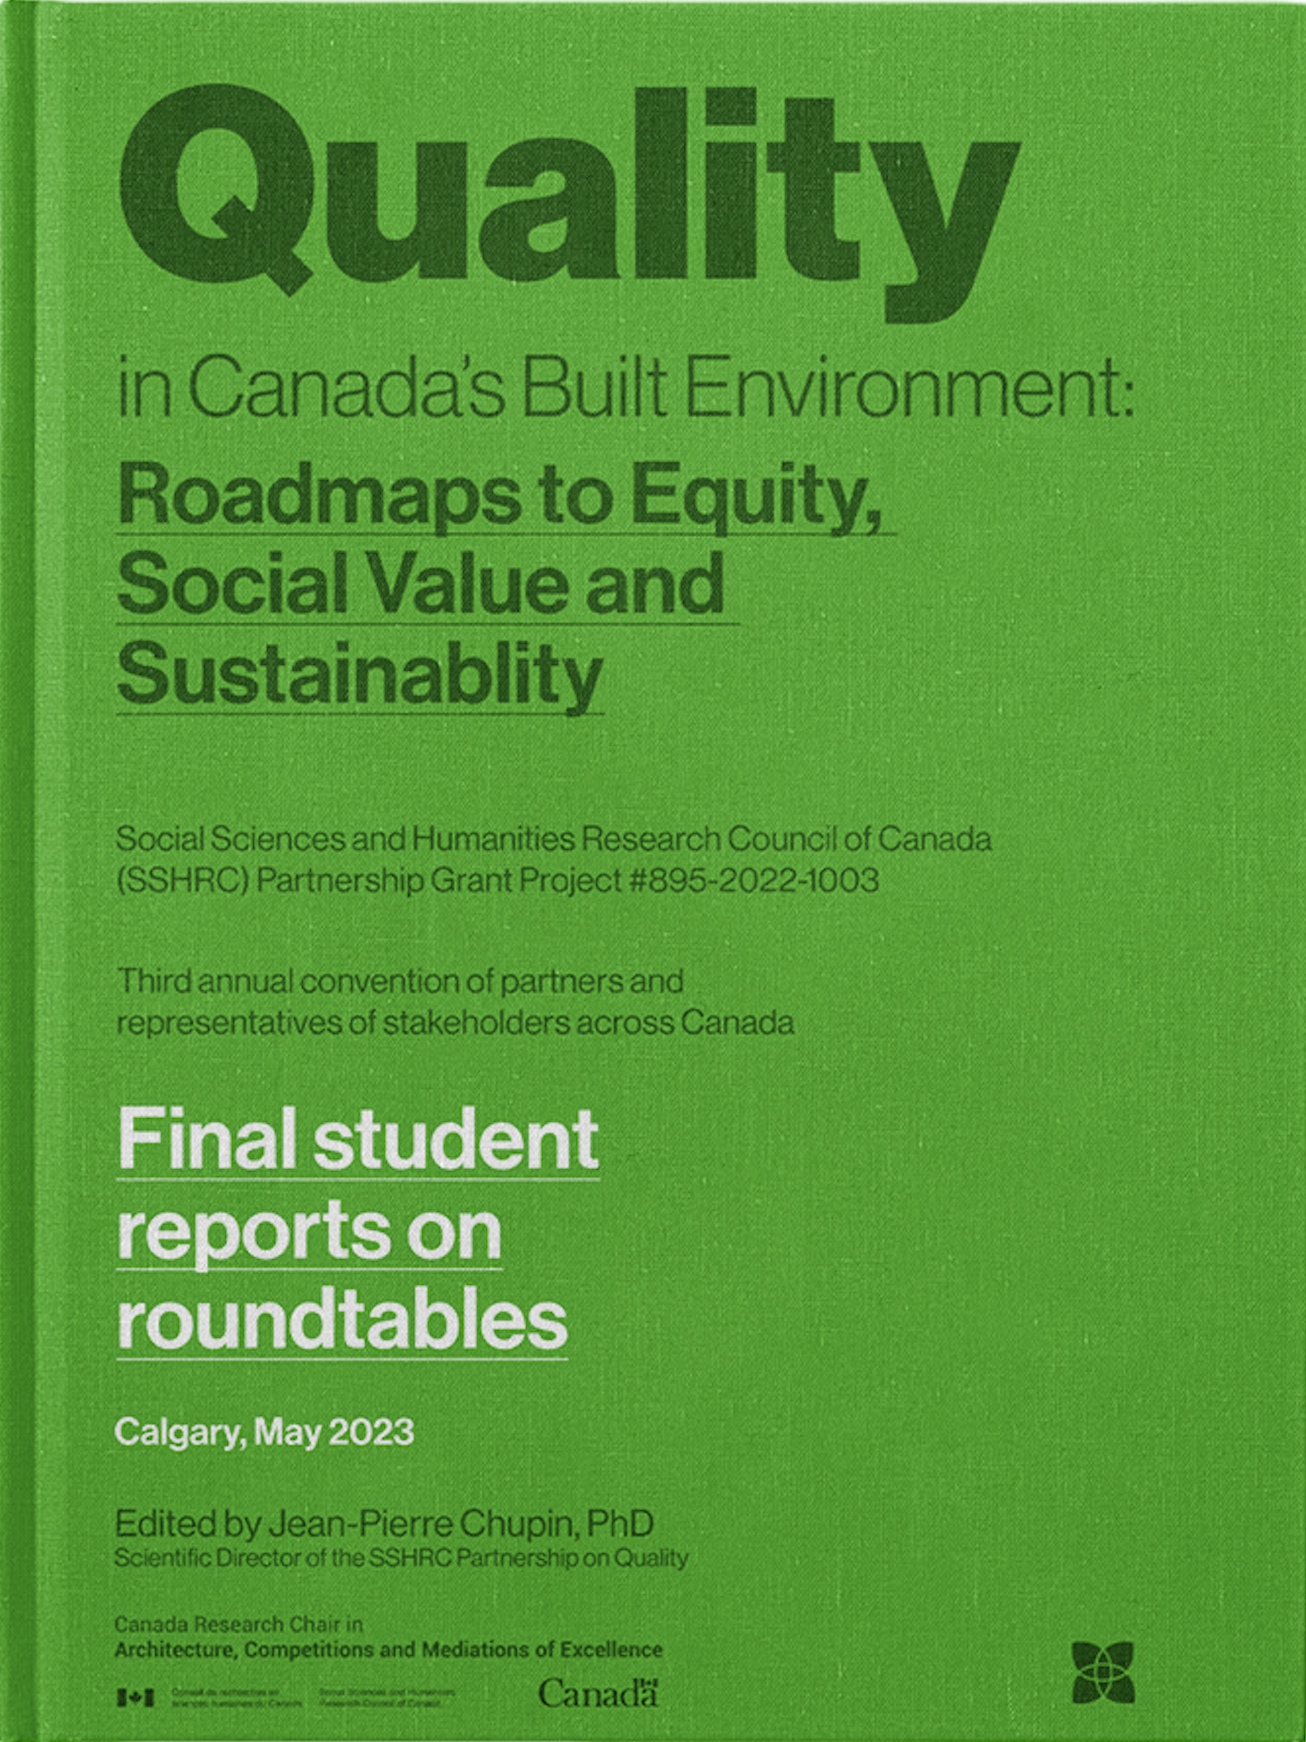 Final Student Reports on Roundtables. Third Annual Convention, Calgary, May 2023 SSHRC Research Partnership (#895-2022-1003). Edited by Jean-Pierre Chupin, 2023, Université de Montréal. 62 pages.